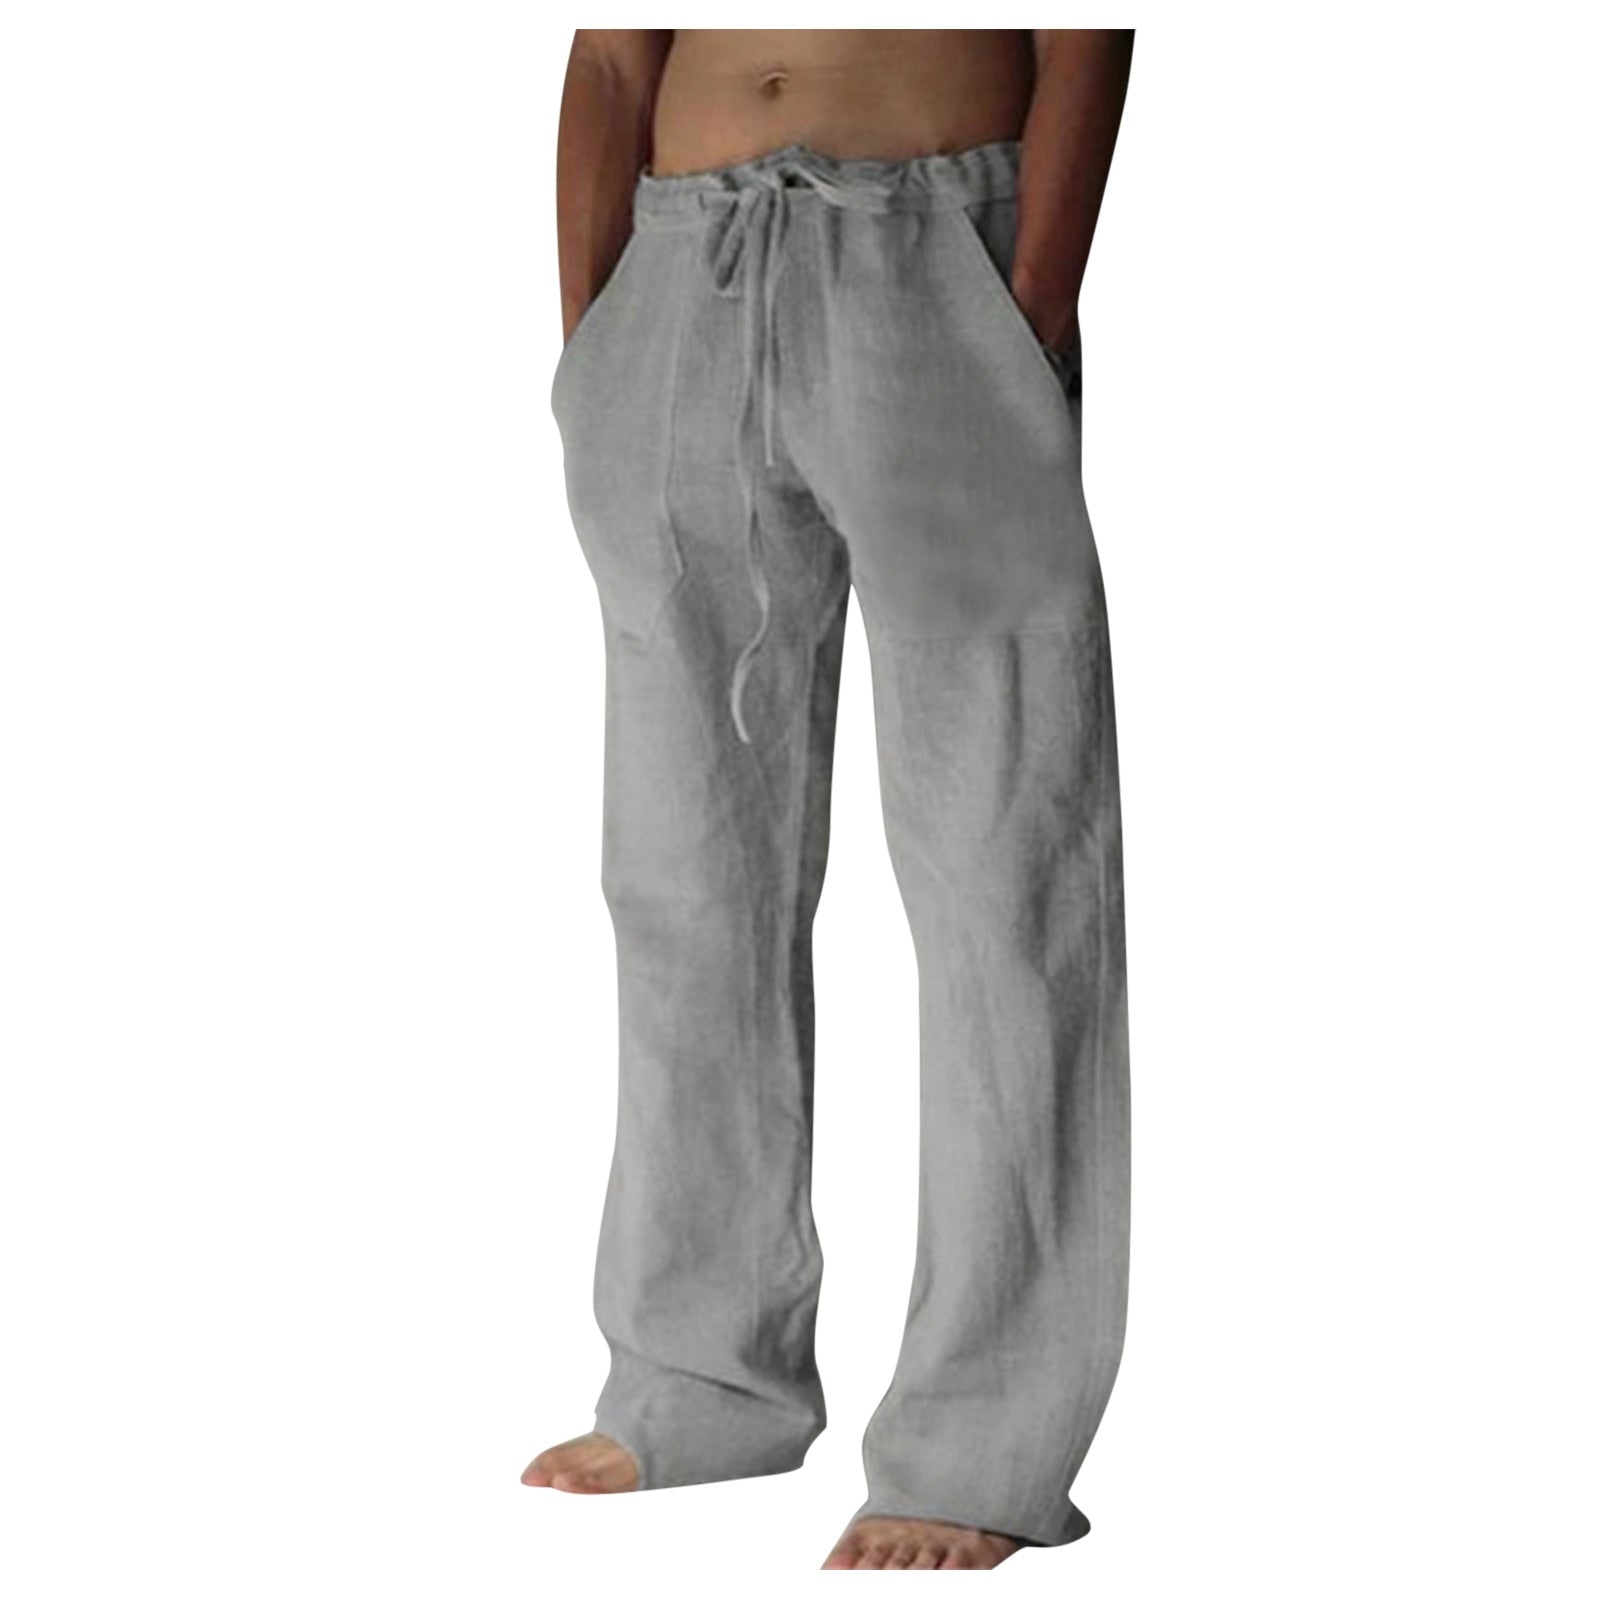 VIKING MENS TROUSERS – Forged in Valhalla